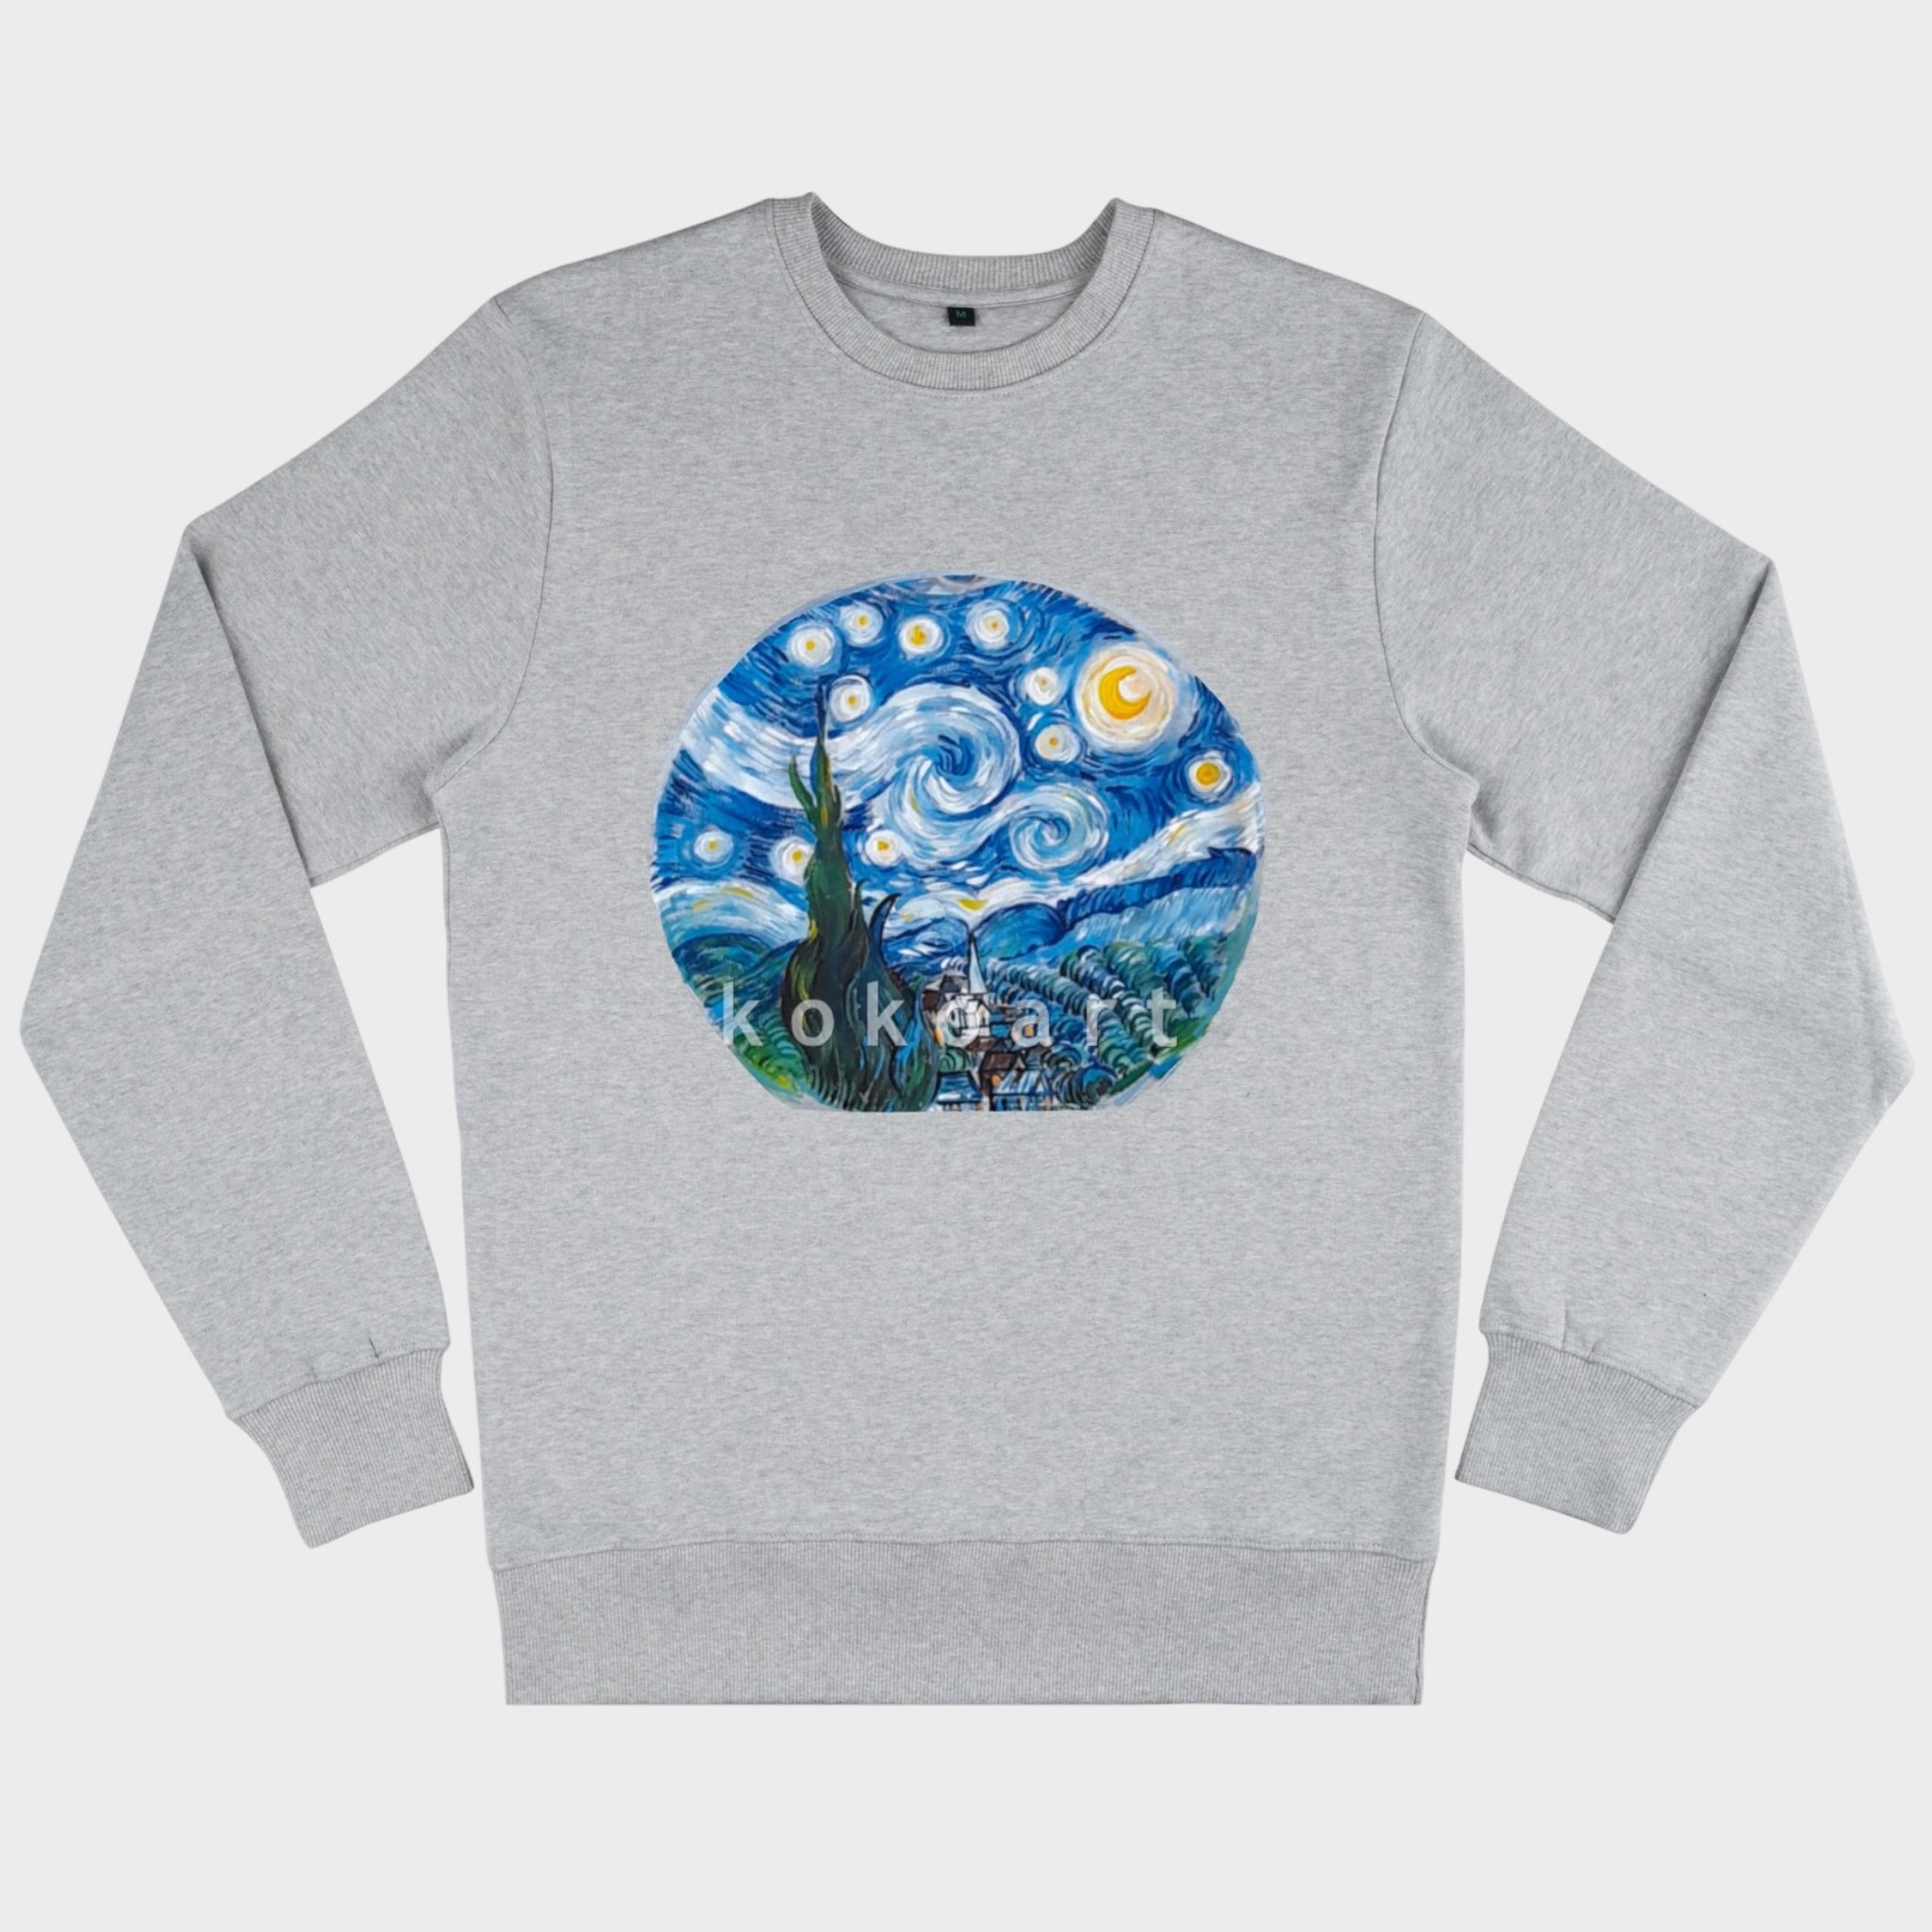 Starry Night - Hand painted Organic Cotton Clothing